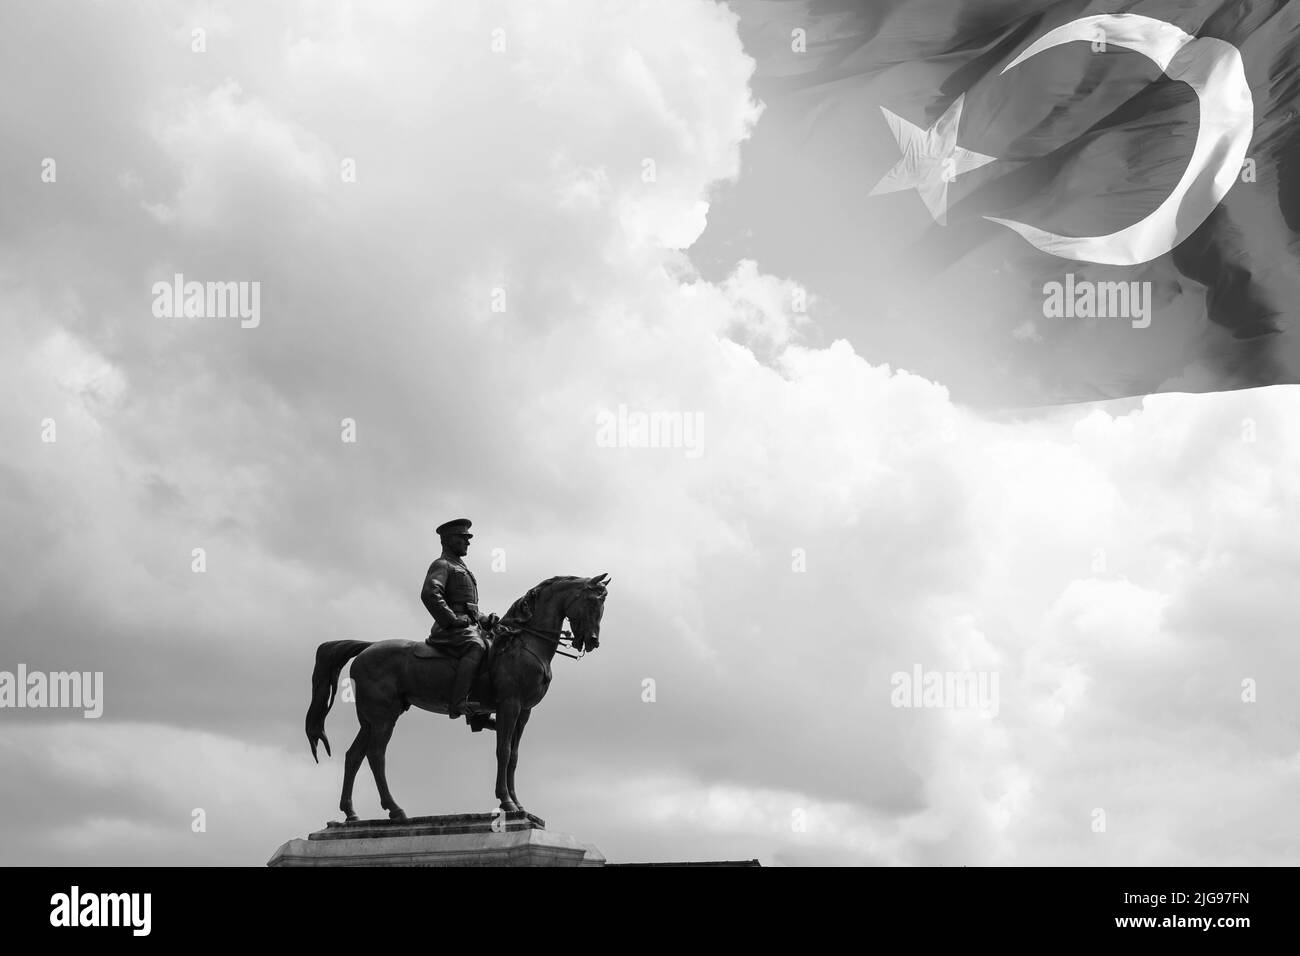 10th november memorial day of Ataturk background photo. 10 Kasim black and white concept photo with Turkish flag and statue of Ataturk. Stock Photo